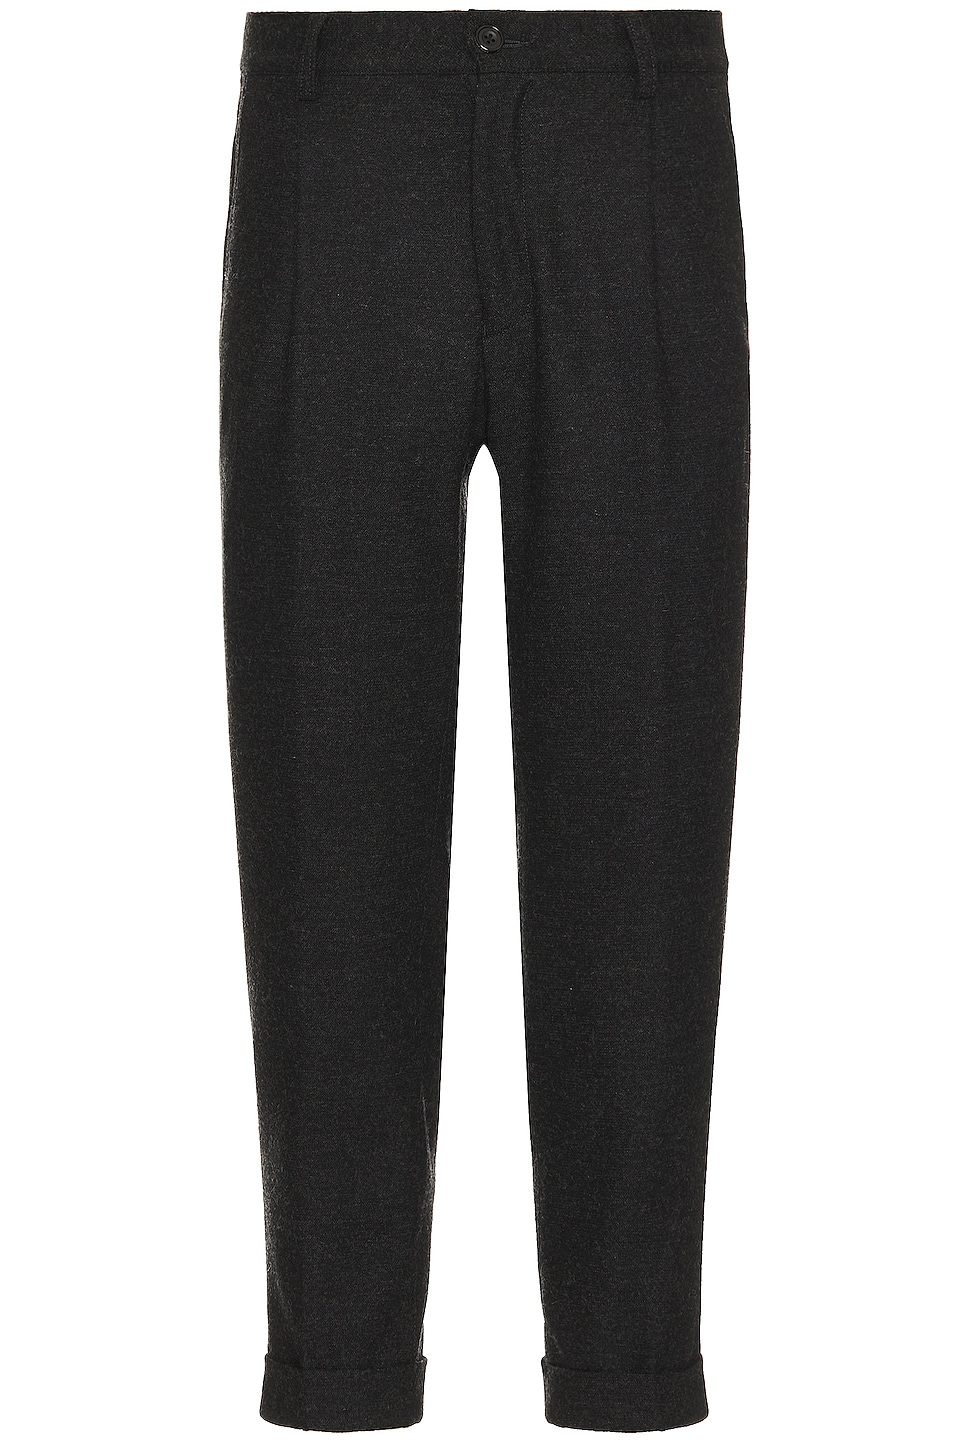 Image 1 of Beams Plus Pleat Wool Cashmere Pant in Charcoal